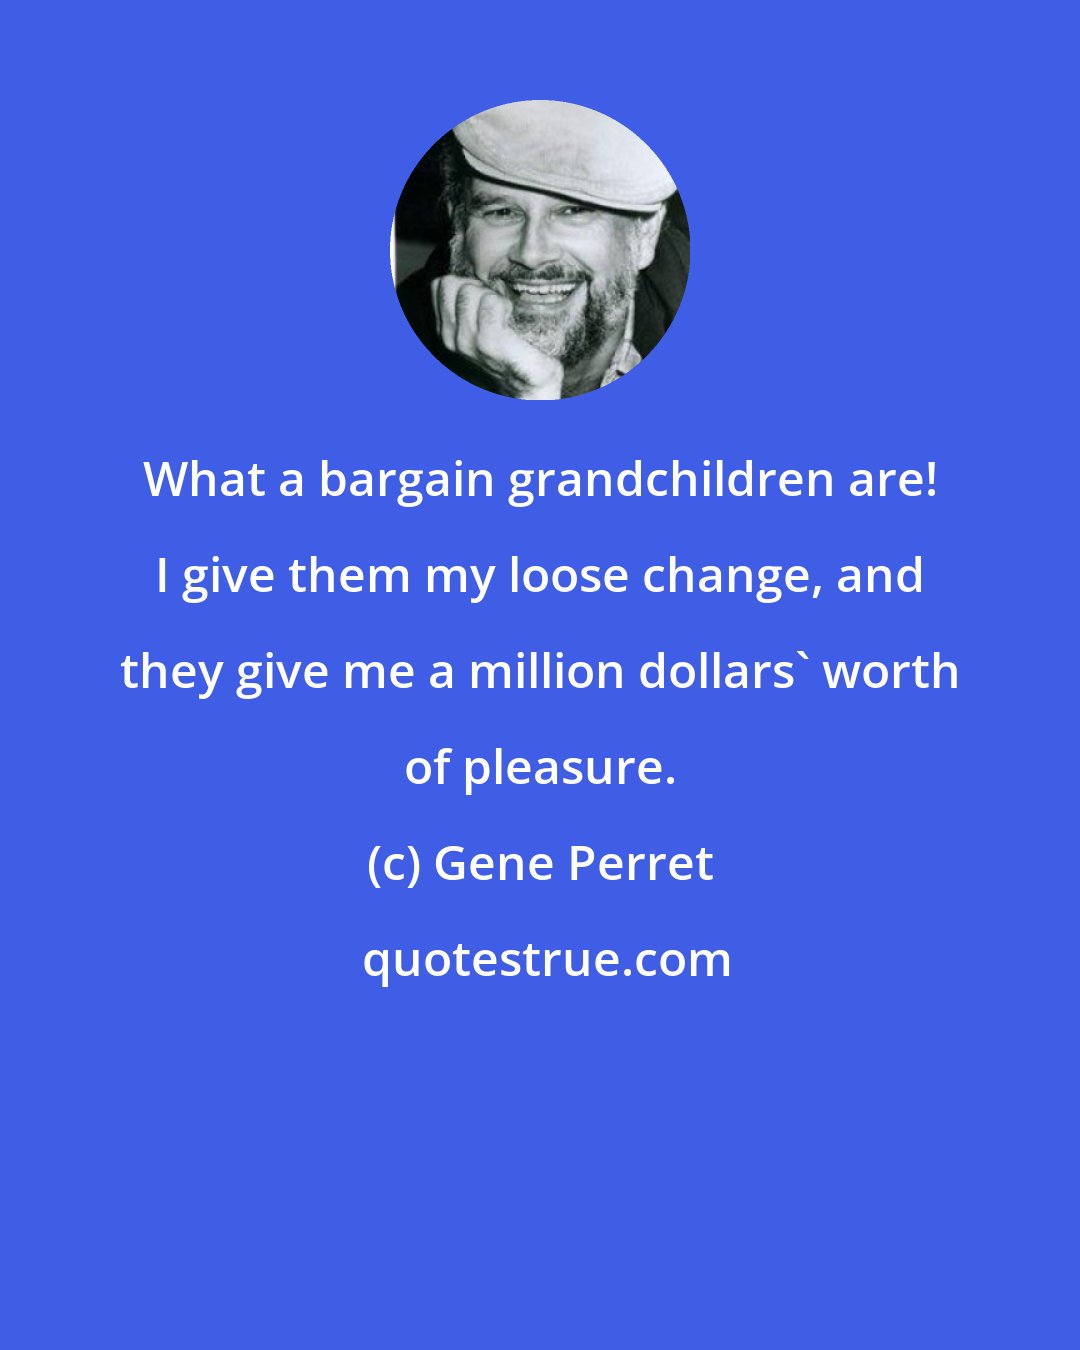 Gene Perret: What a bargain grandchildren are! I give them my loose change, and they give me a million dollars' worth of pleasure.